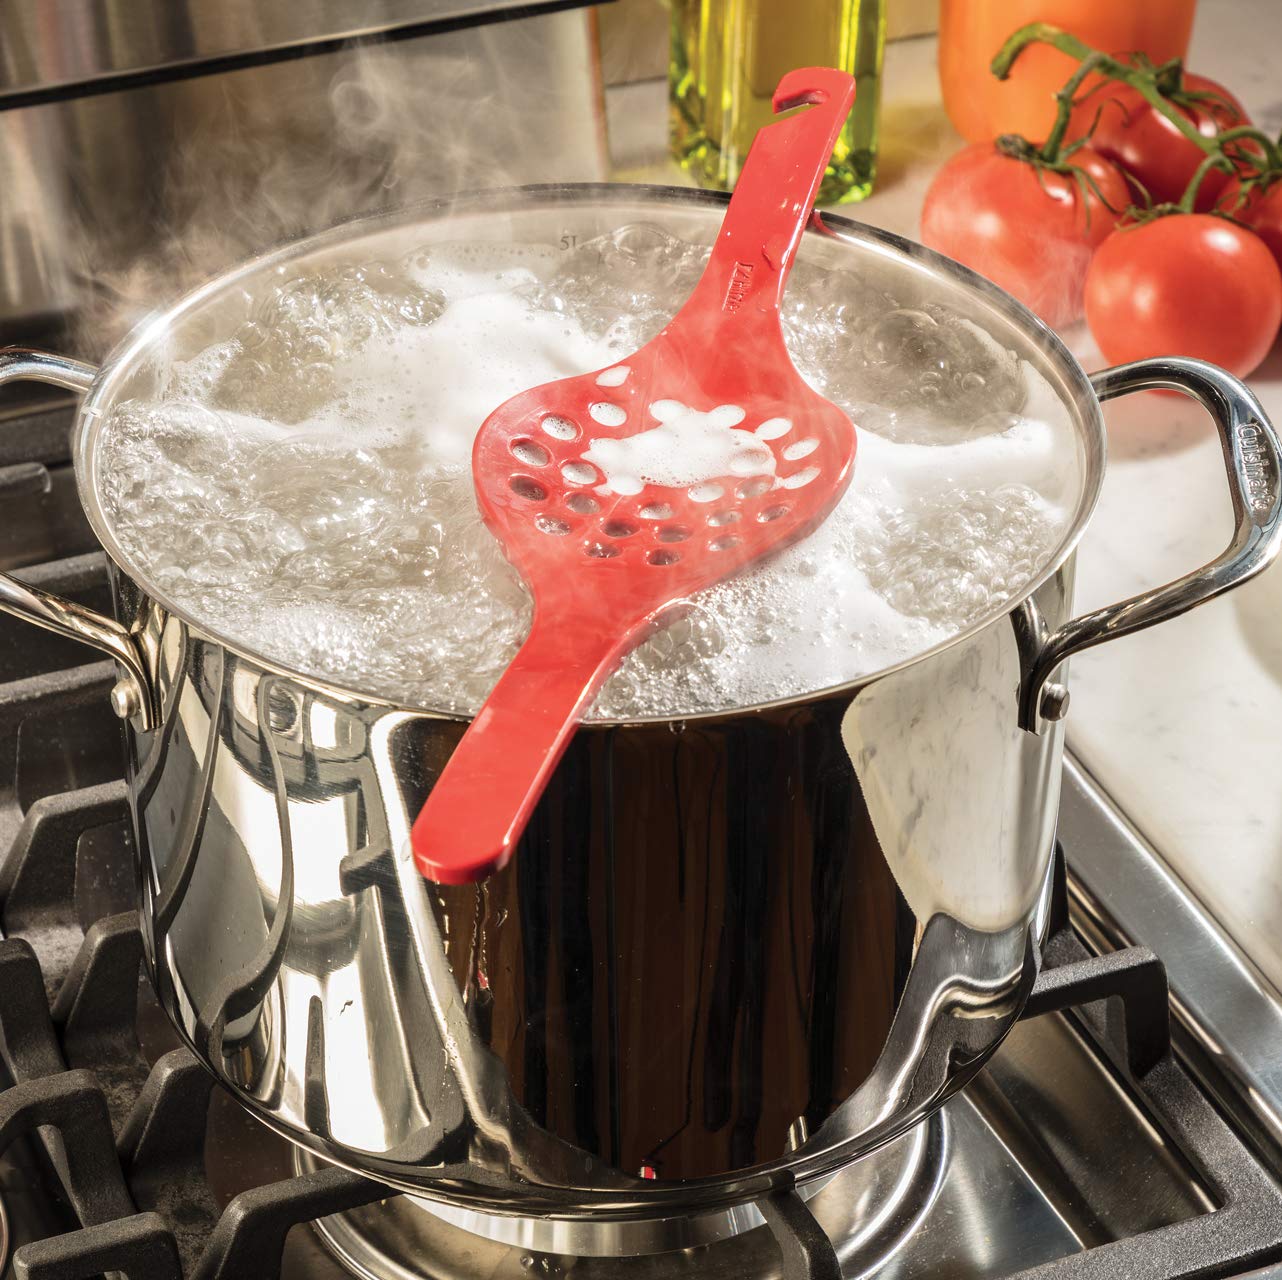 How to Prevent Water From Boiling Over on the Stove